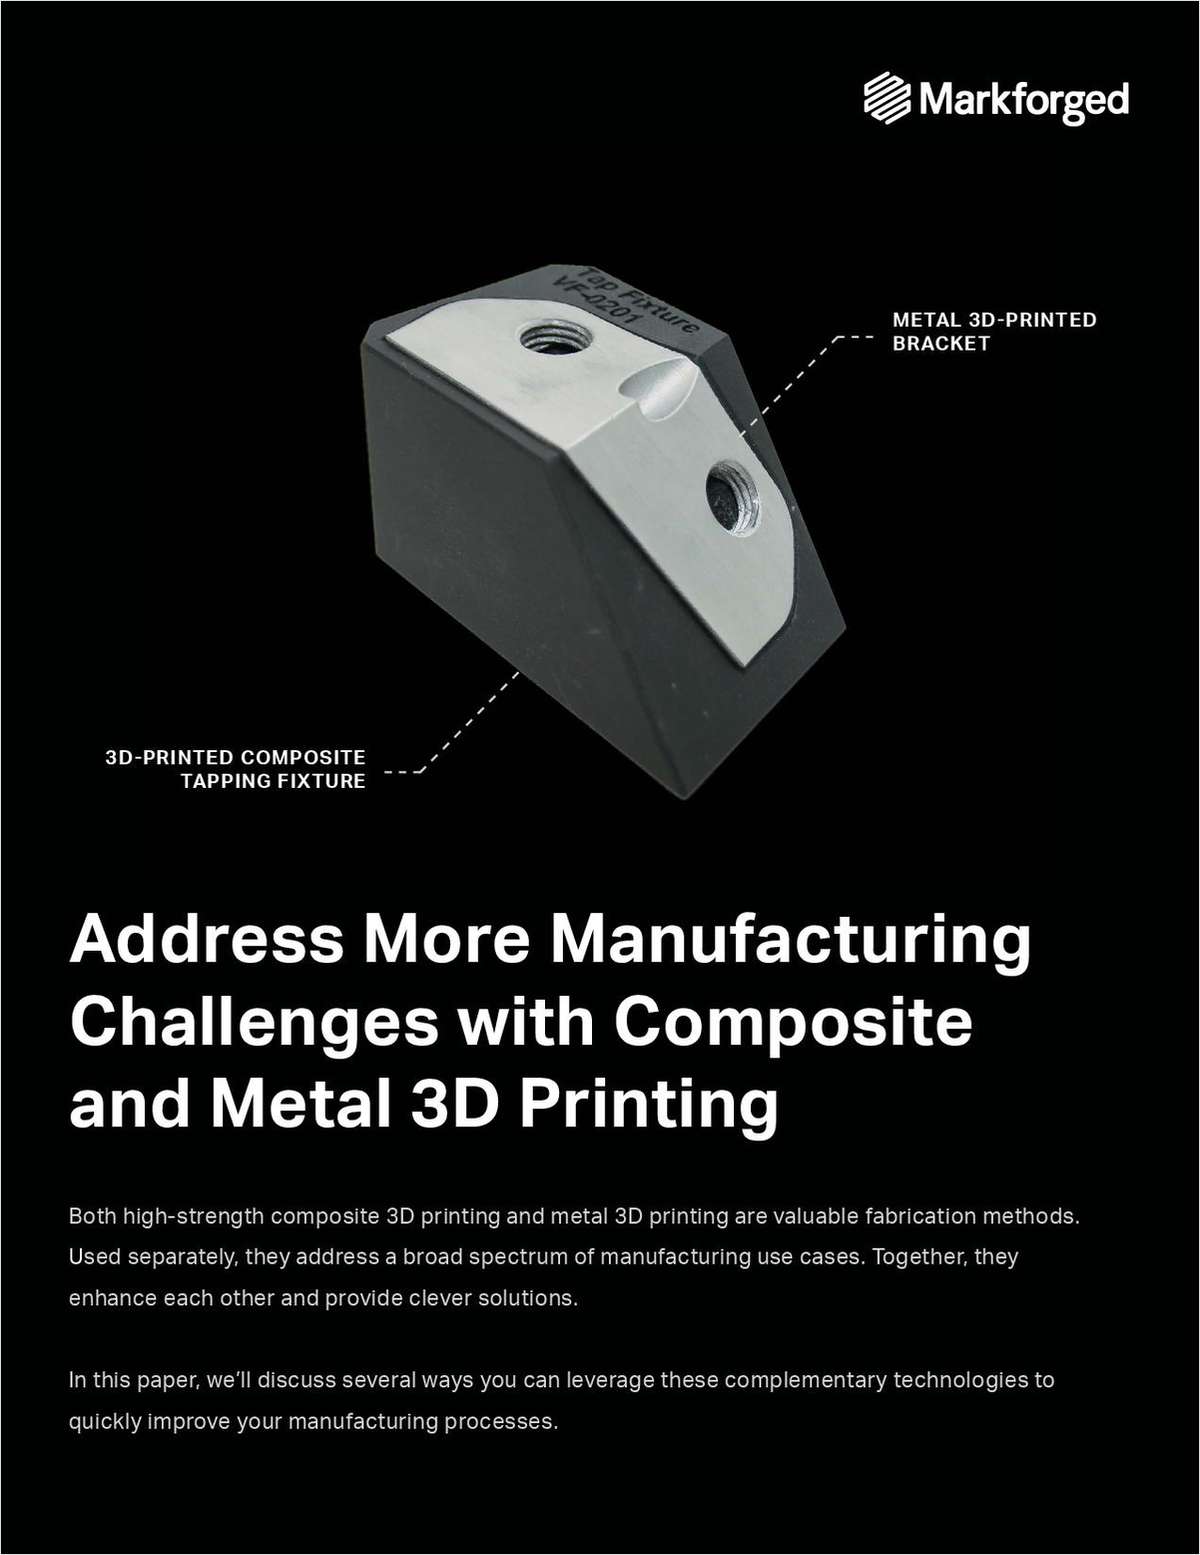 Address More Manufacturing Challenges with Composite and Metal 3D Printing